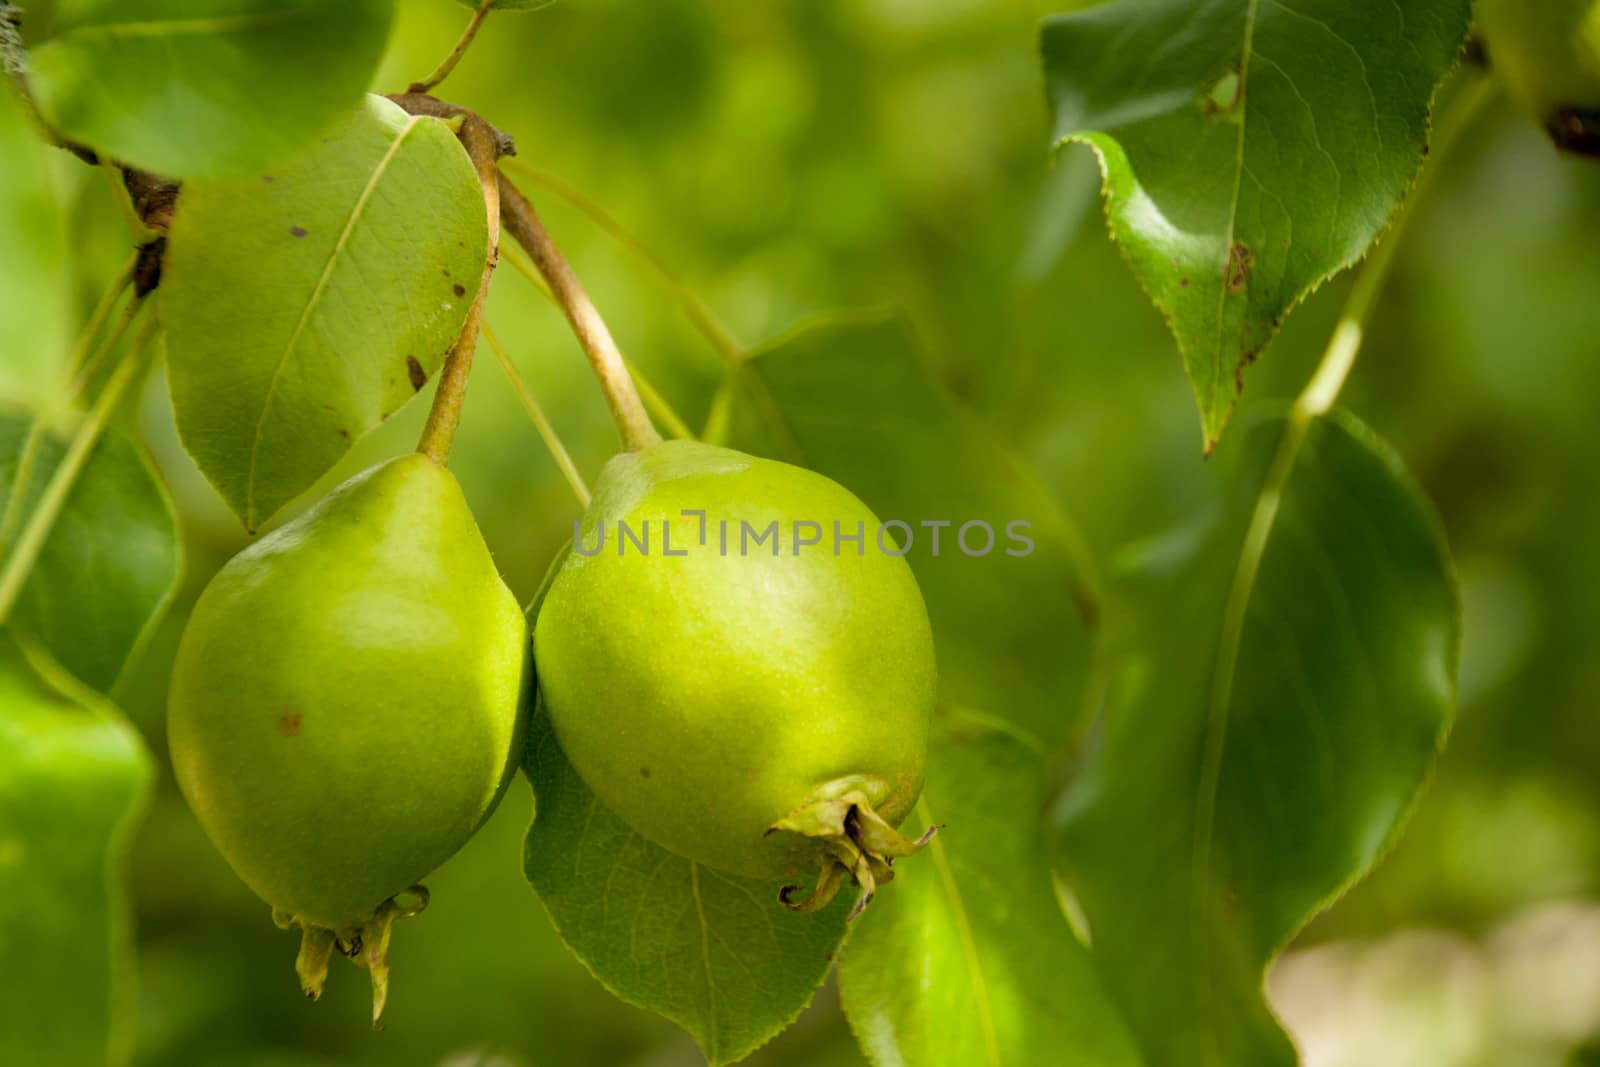 Two ripe pears hanging on a branch